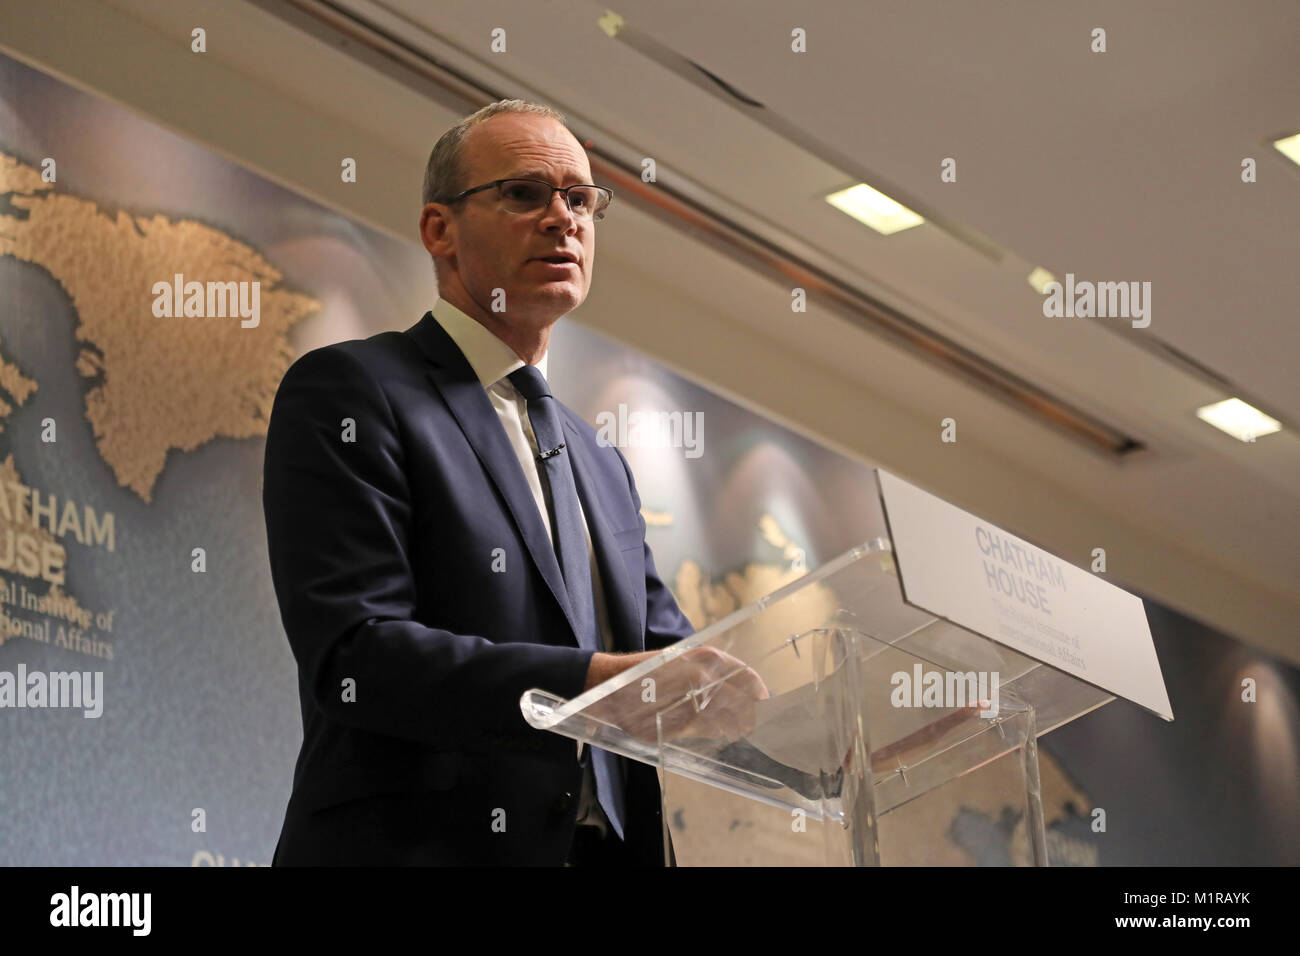 London, UK. 31st January, 2018. Simon Coveney, Ireland’s deputy prime minister (Tánaiste) and minister for foreign affairs and trade, giving a speech on British-Irish relations at the Chatham House think-tank in London on 31 January 2018. Credit: Dominic Dudley/Alamy Live News Stock Photo